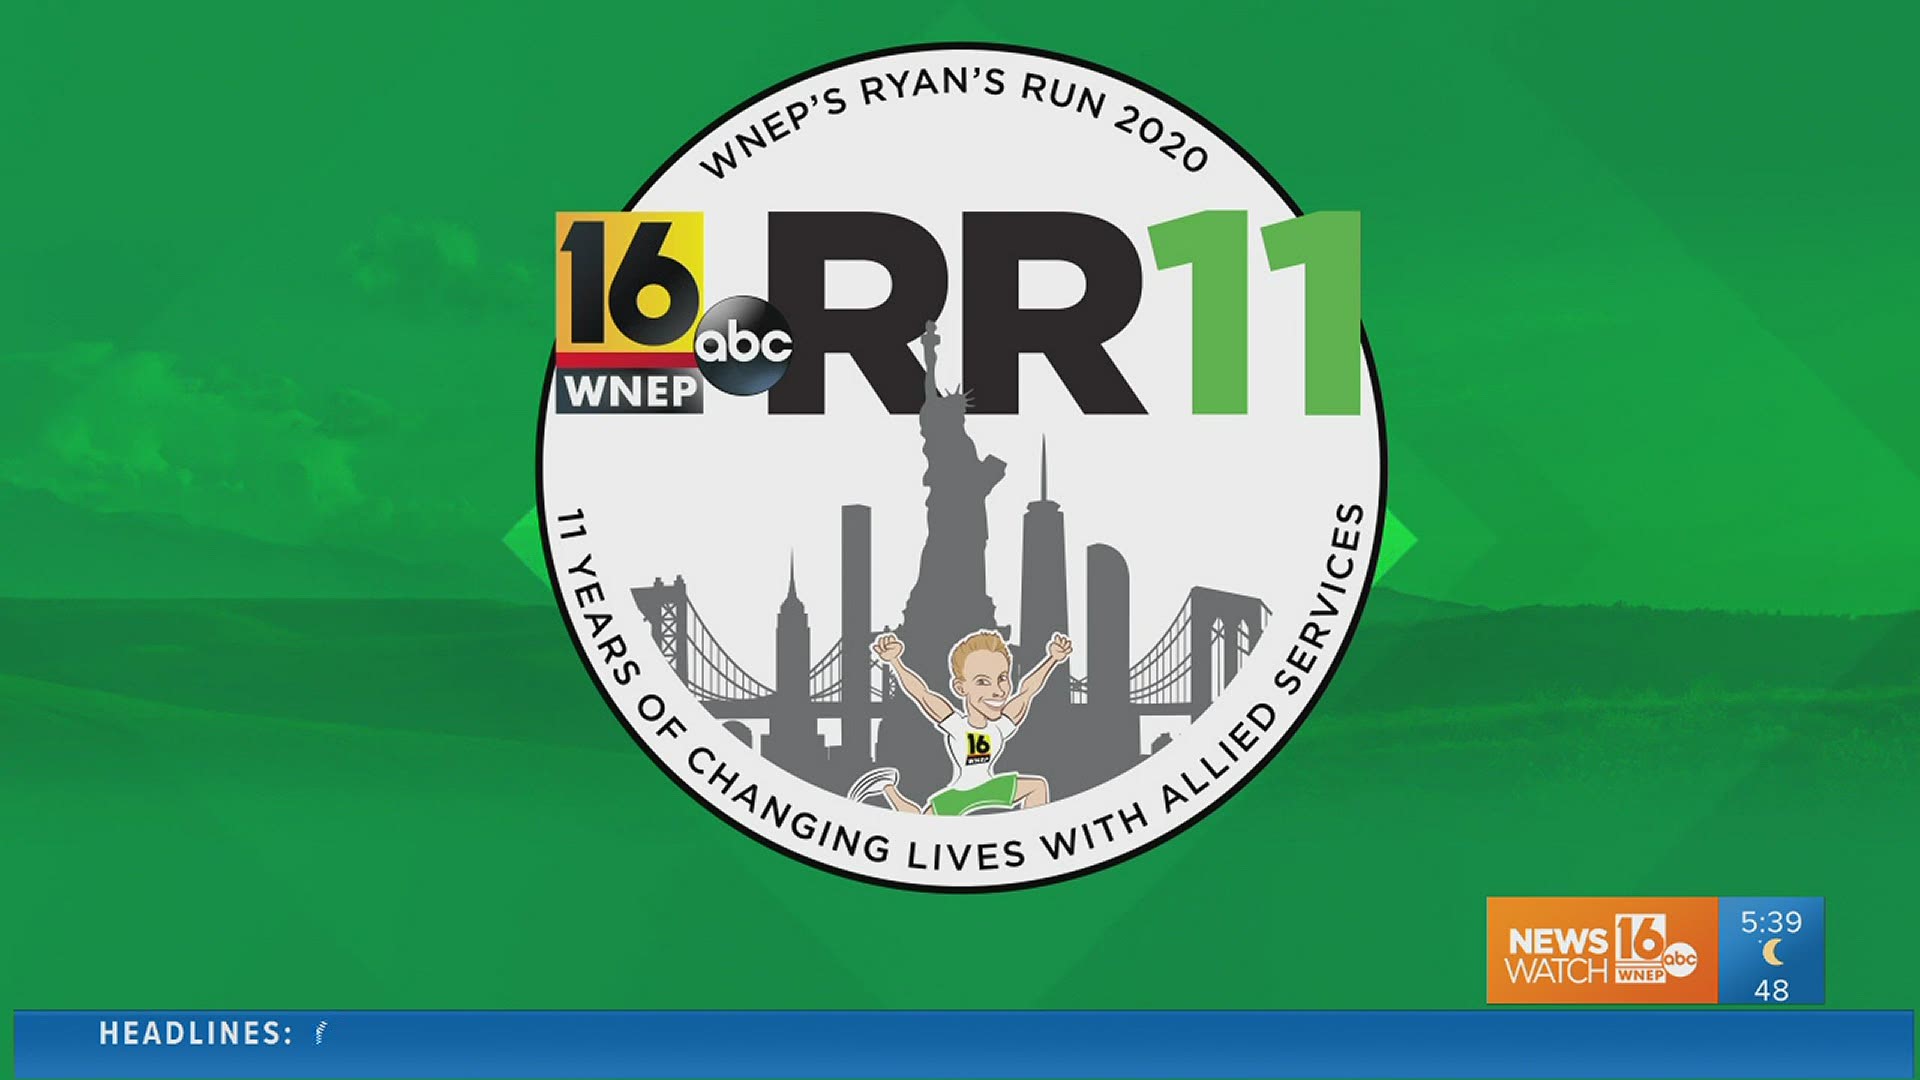 Despite a tough year of fundraising during the pandemic and most community events canceled, WNEP's Ryan's Run team rallied to still raise cash for the cause.